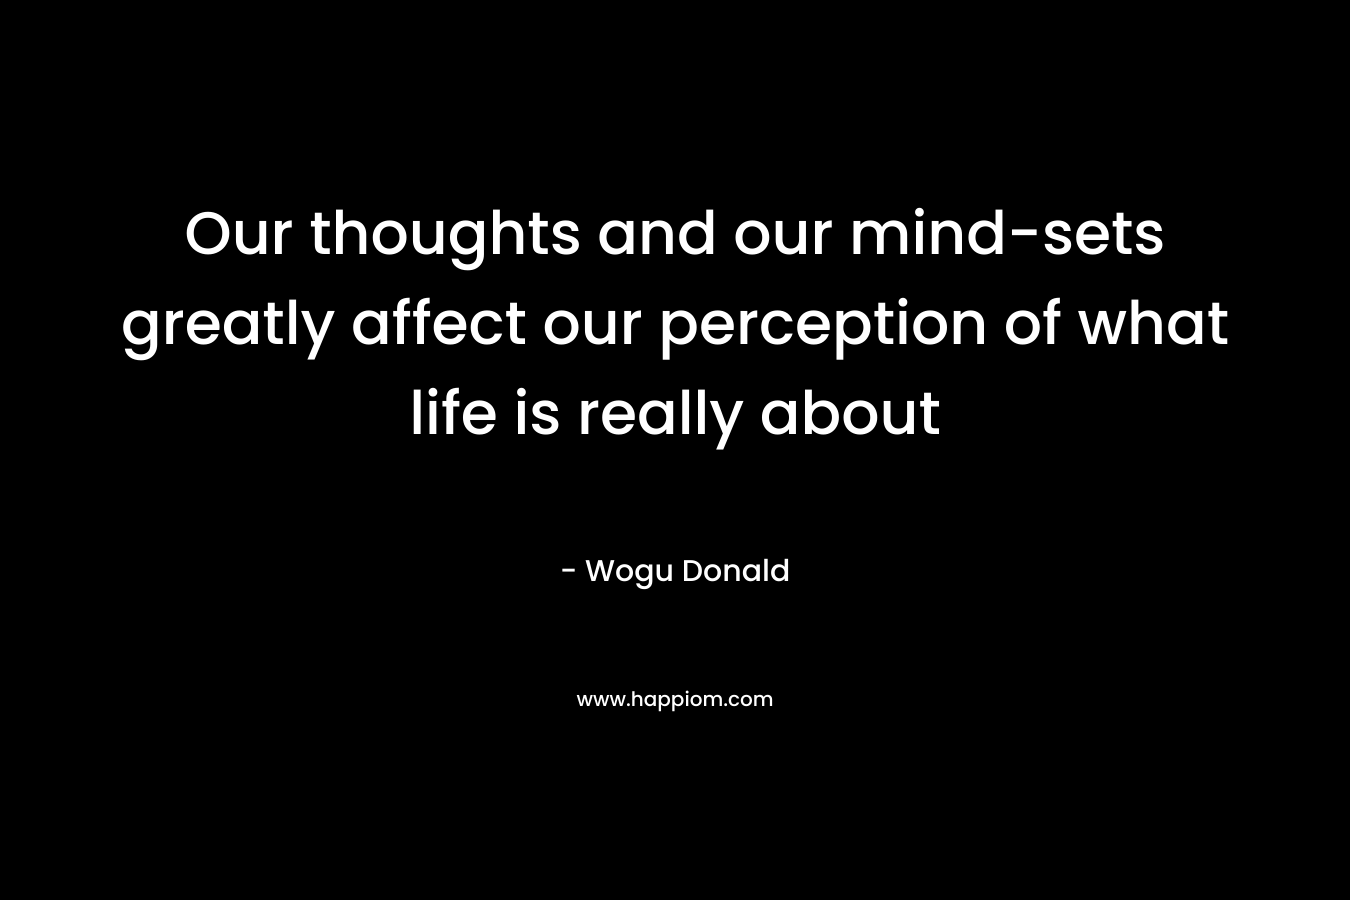 Our thoughts and our mind-sets greatly affect our perception of what life is really about – Wogu Donald